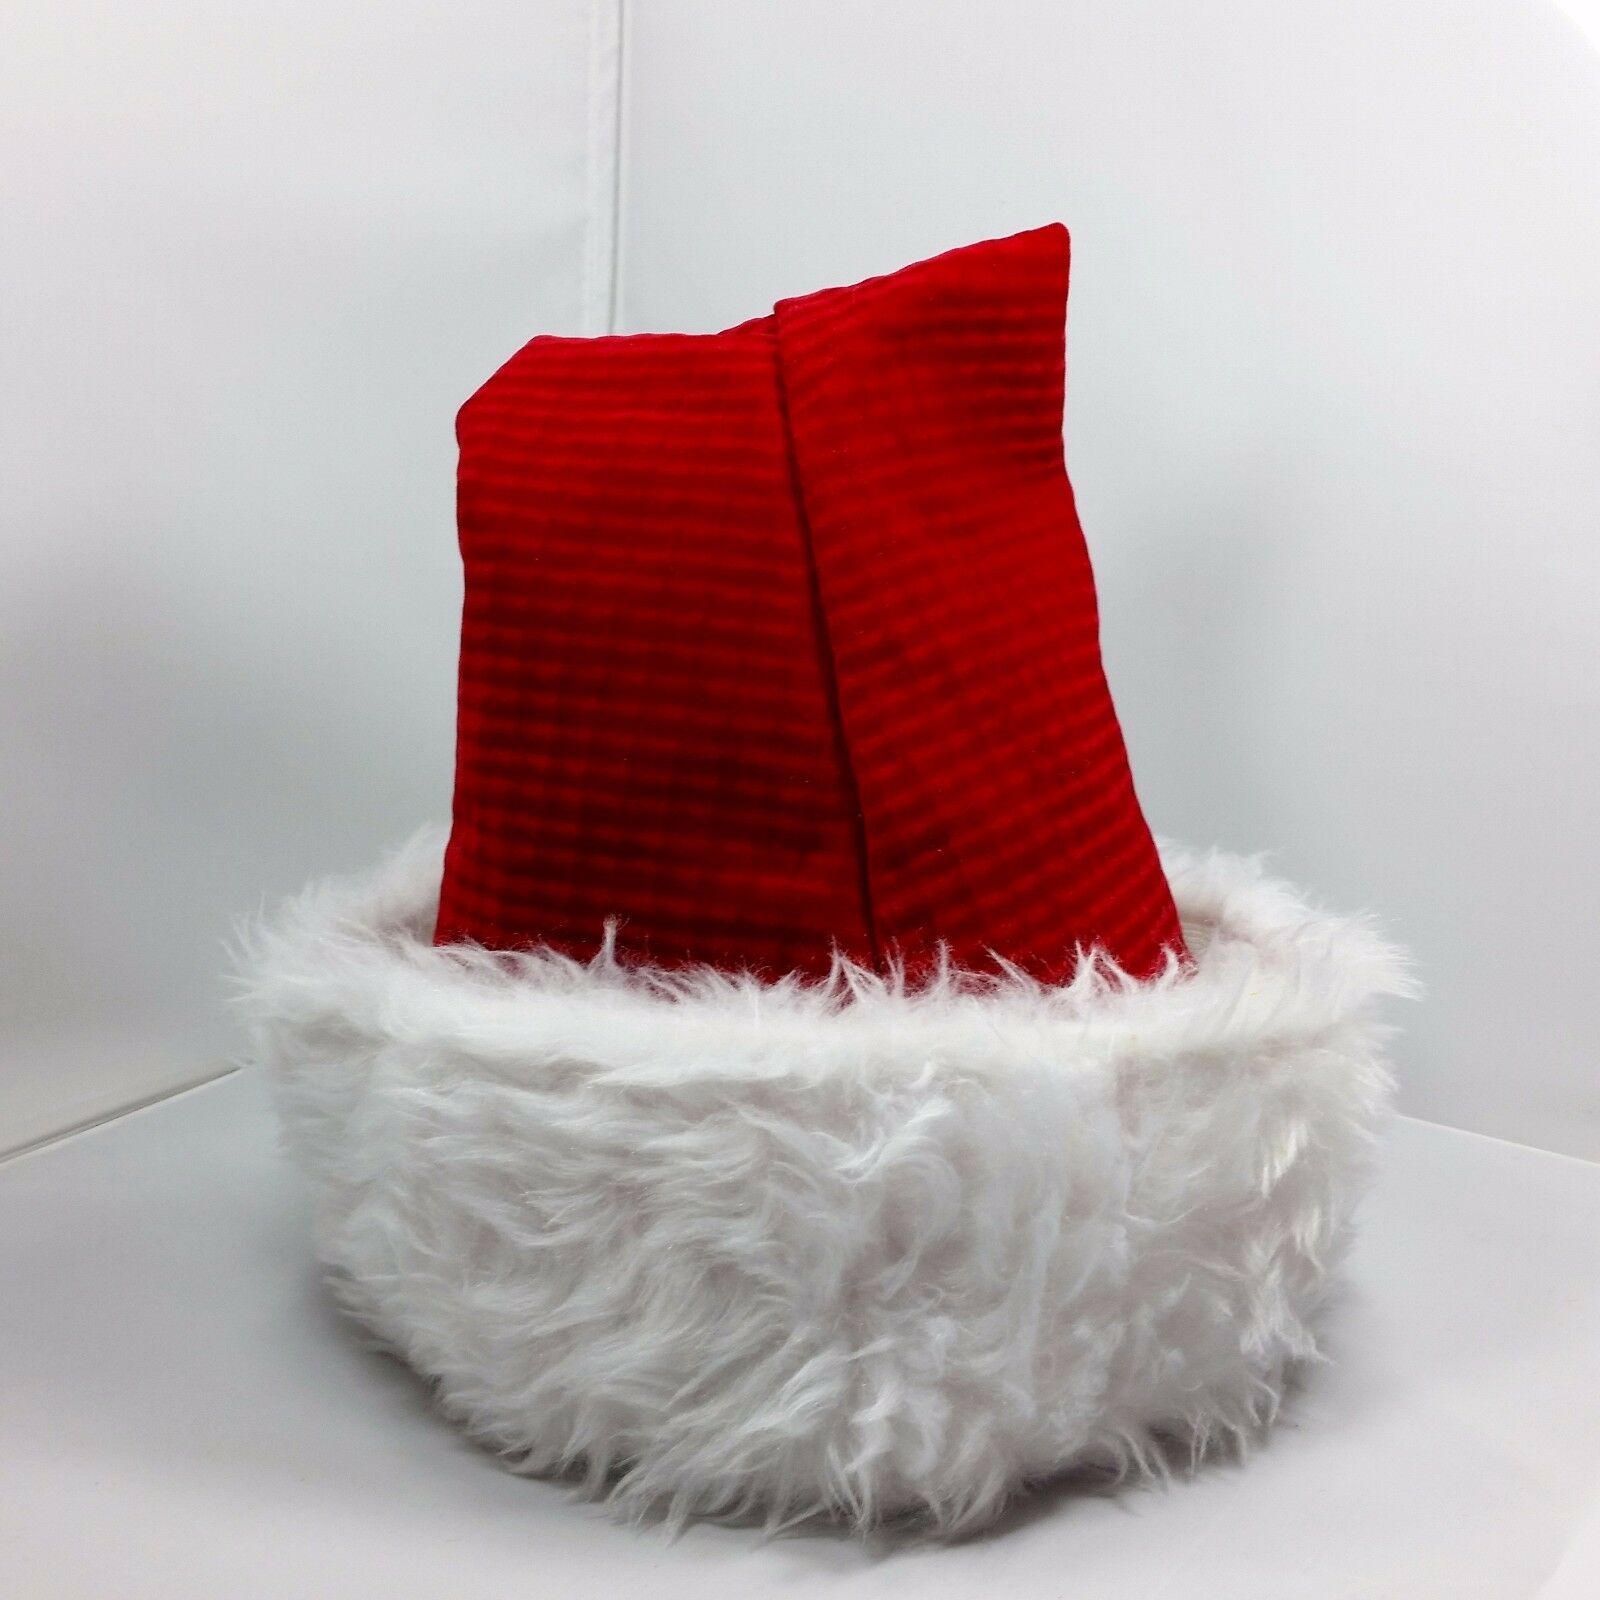 Santa Claus Christmas Hat Fur Band Textured Velveteen Costume Accessory Red USA - At Grandma's Table